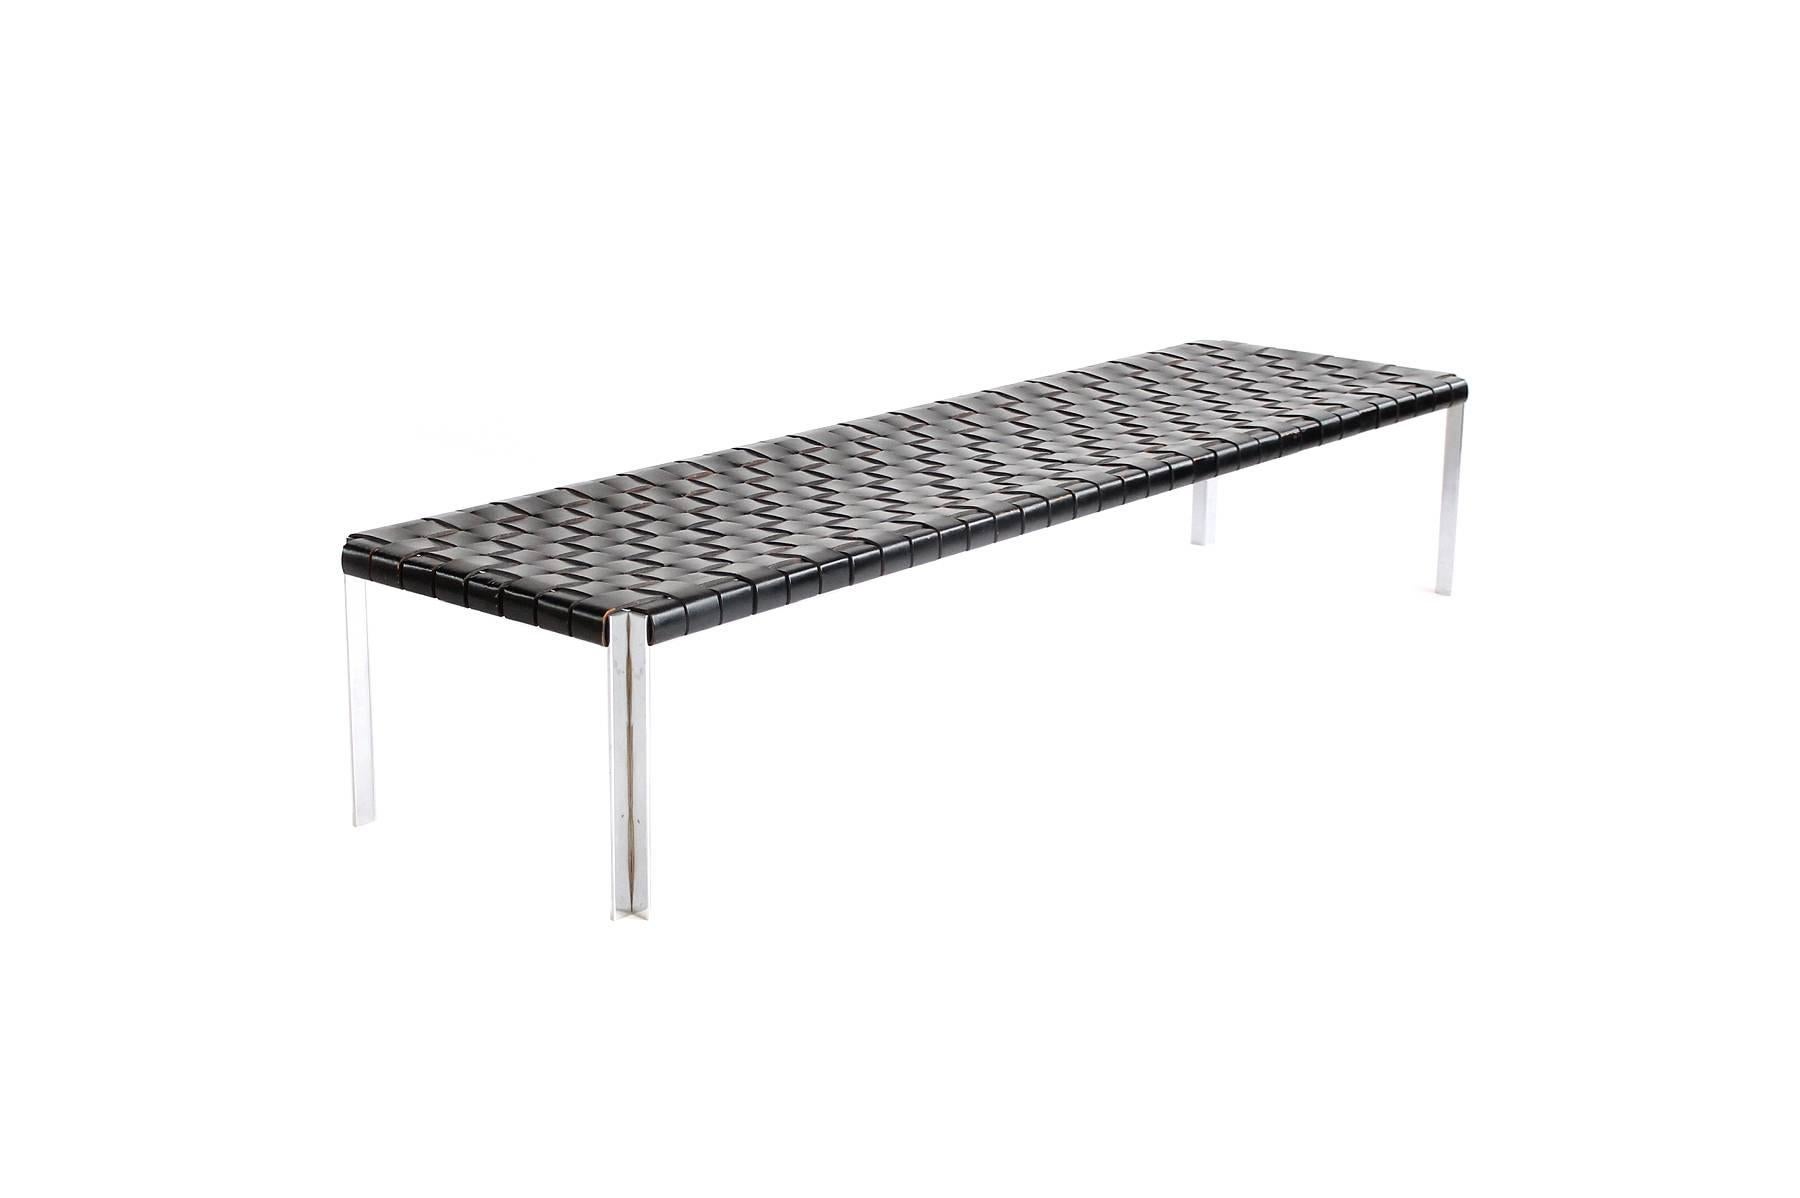 Magnificent bench with woven black leather belts on a matte chromium-plated steel base designed by Estelle and Erwine Laverne. Manufactured by Laverne International, circa 1955. A rarely seen design from Laverne. Bench in very good condition with a